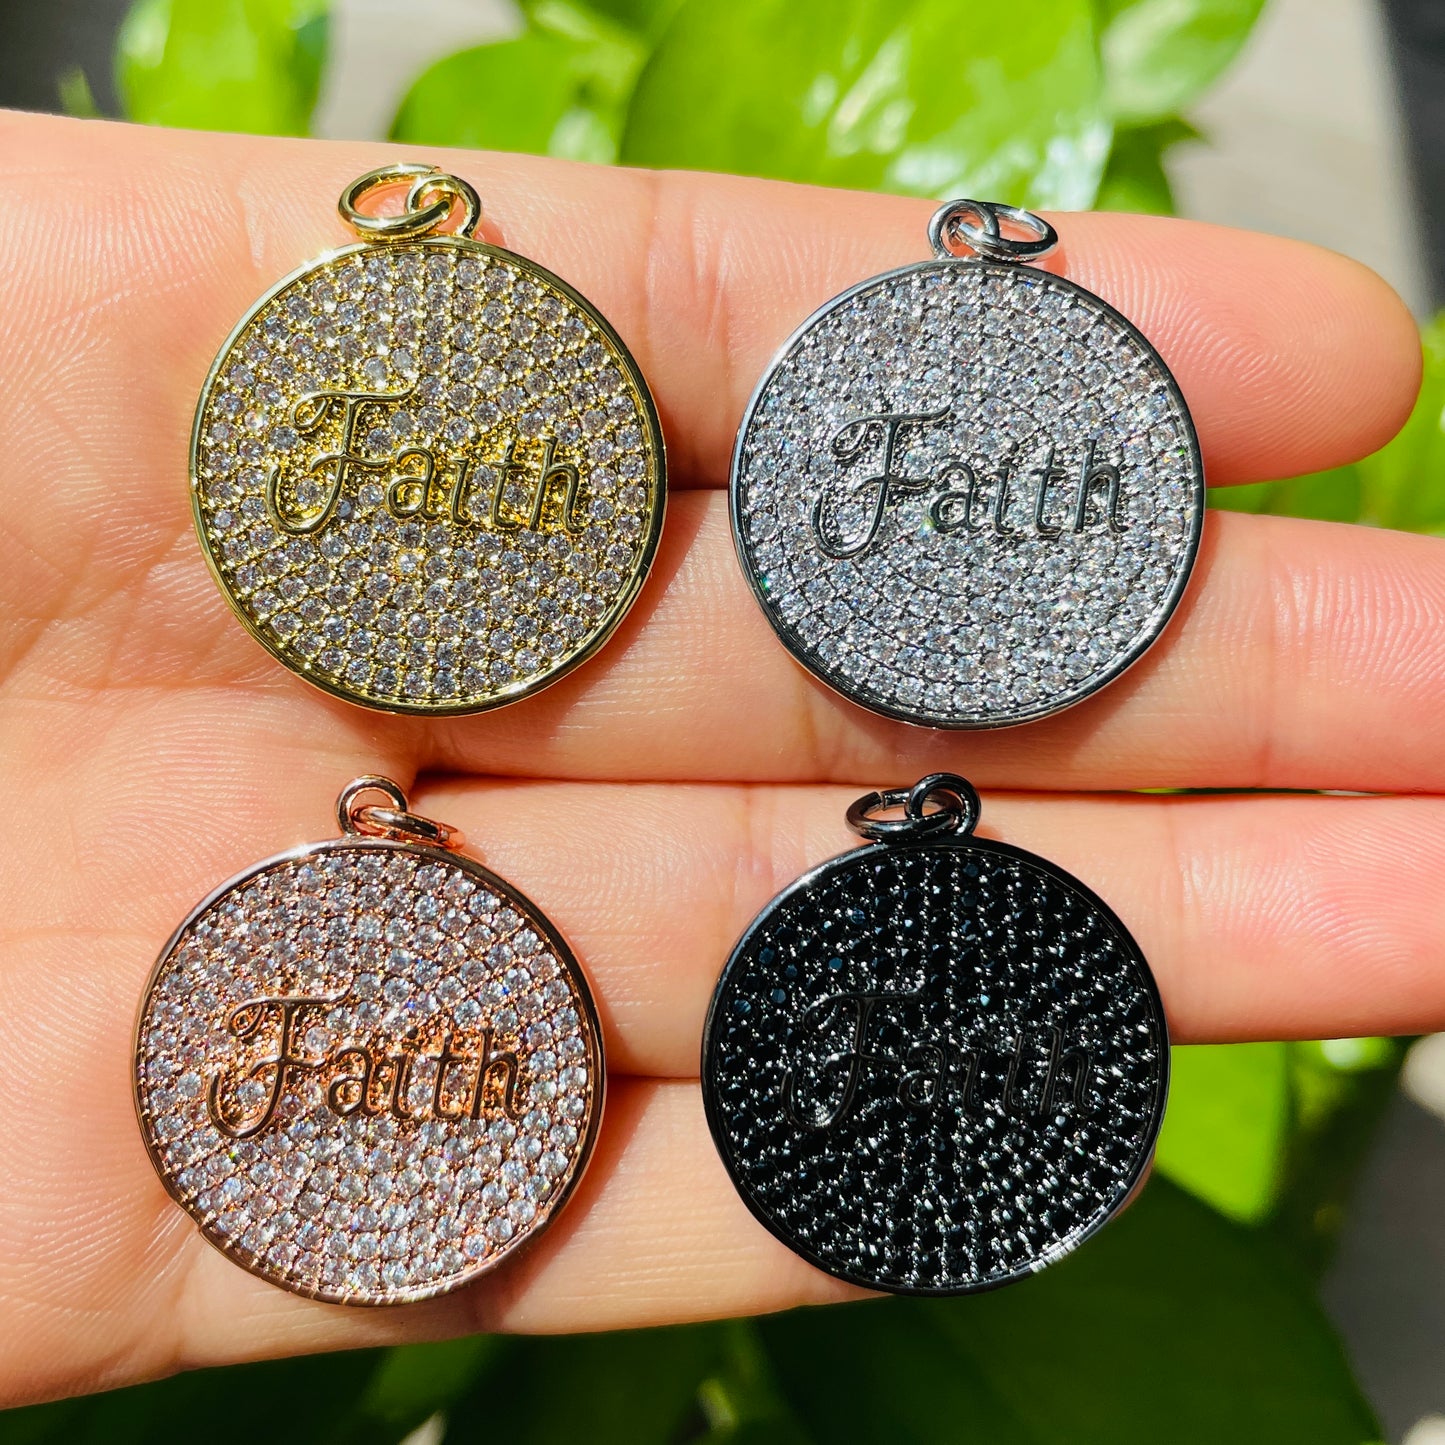 10pcs/lot 25mm CZ Pave Round Plate FAITH Quote Charms Mix Colors CZ Paved Charms Christian Quotes Discs On Sale Charms Beads Beyond